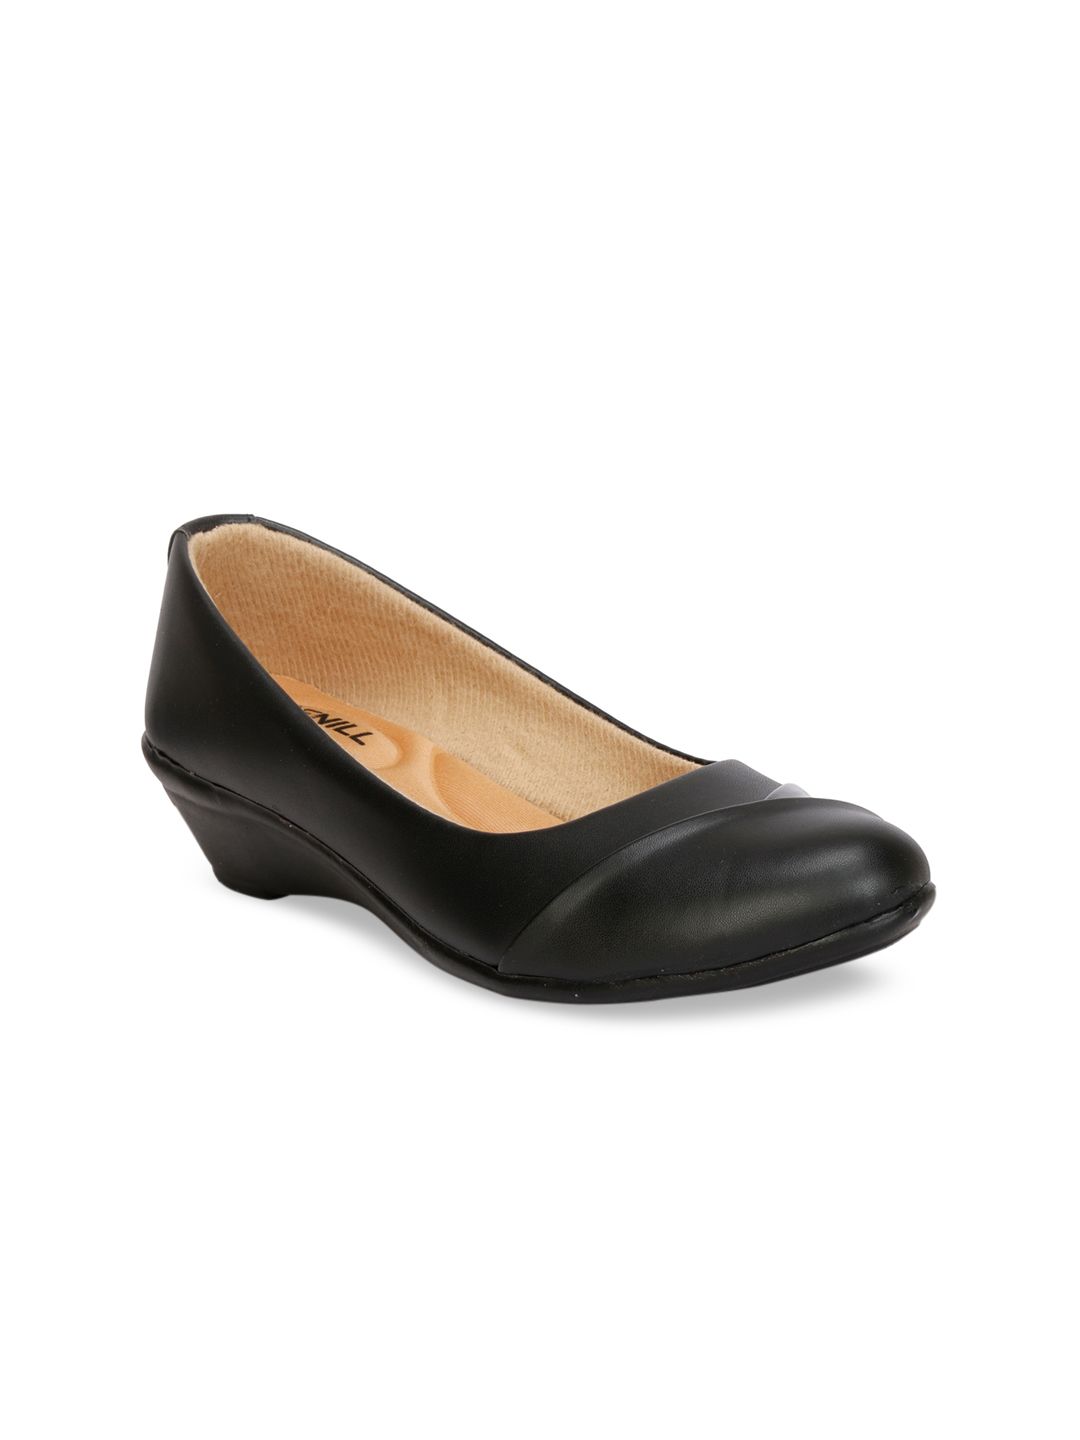 Denill Black Wedge Pumps Price in India